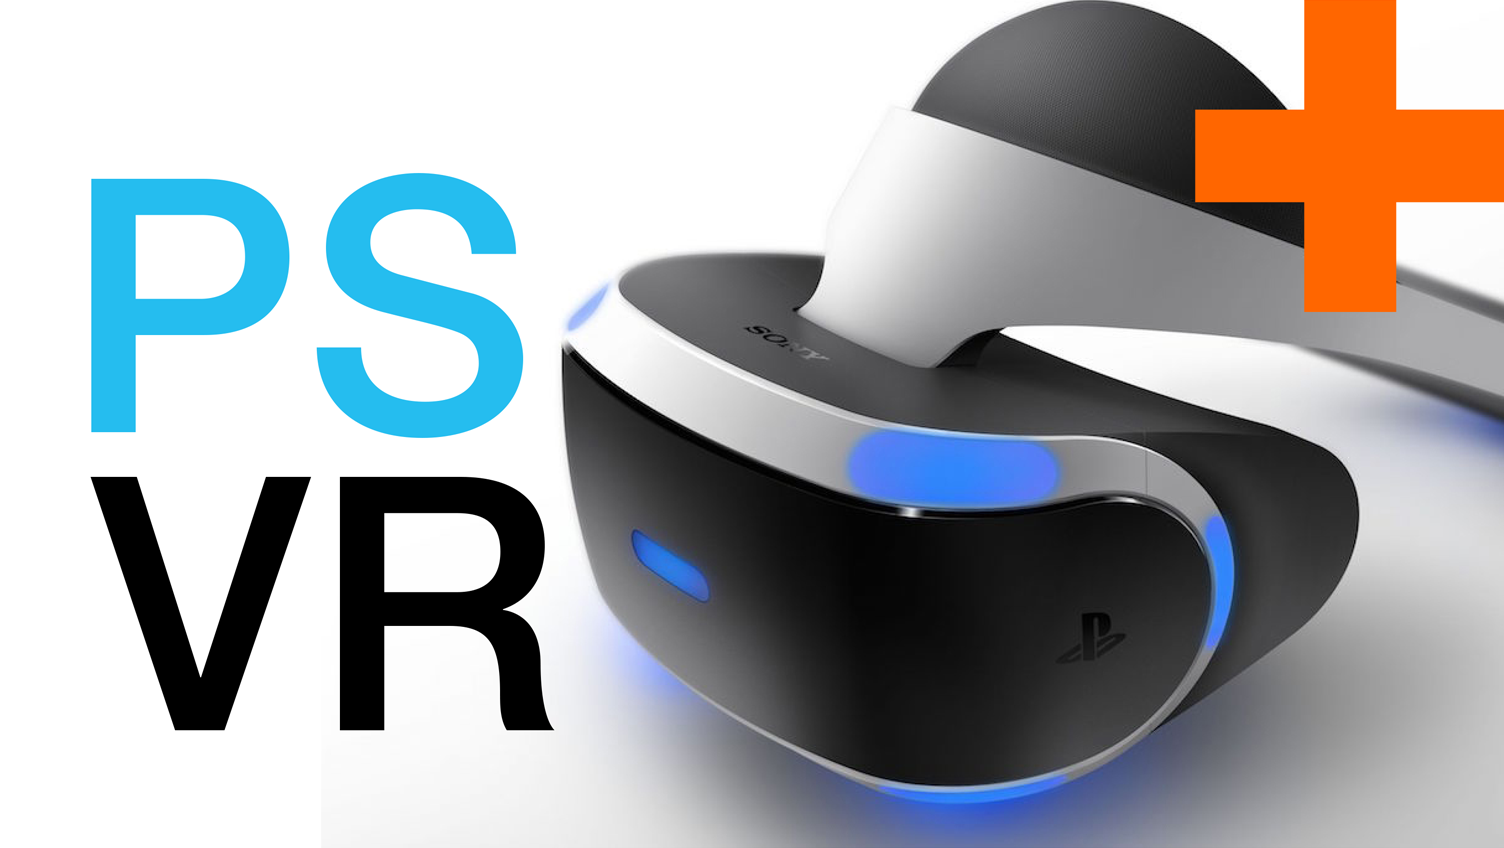 PSVR 2 Review: Worth its weight in gold in the not-too-distant